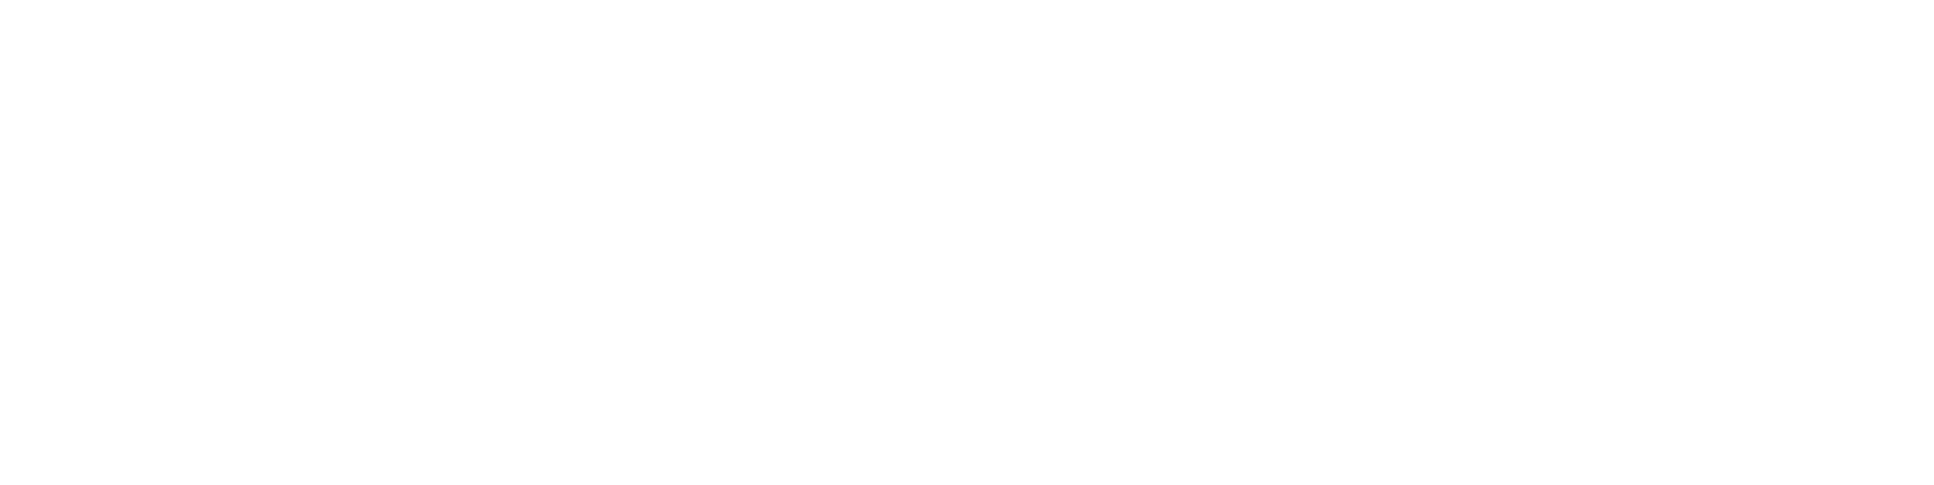 The Institute For The Psychology Of Eating - Logo_04